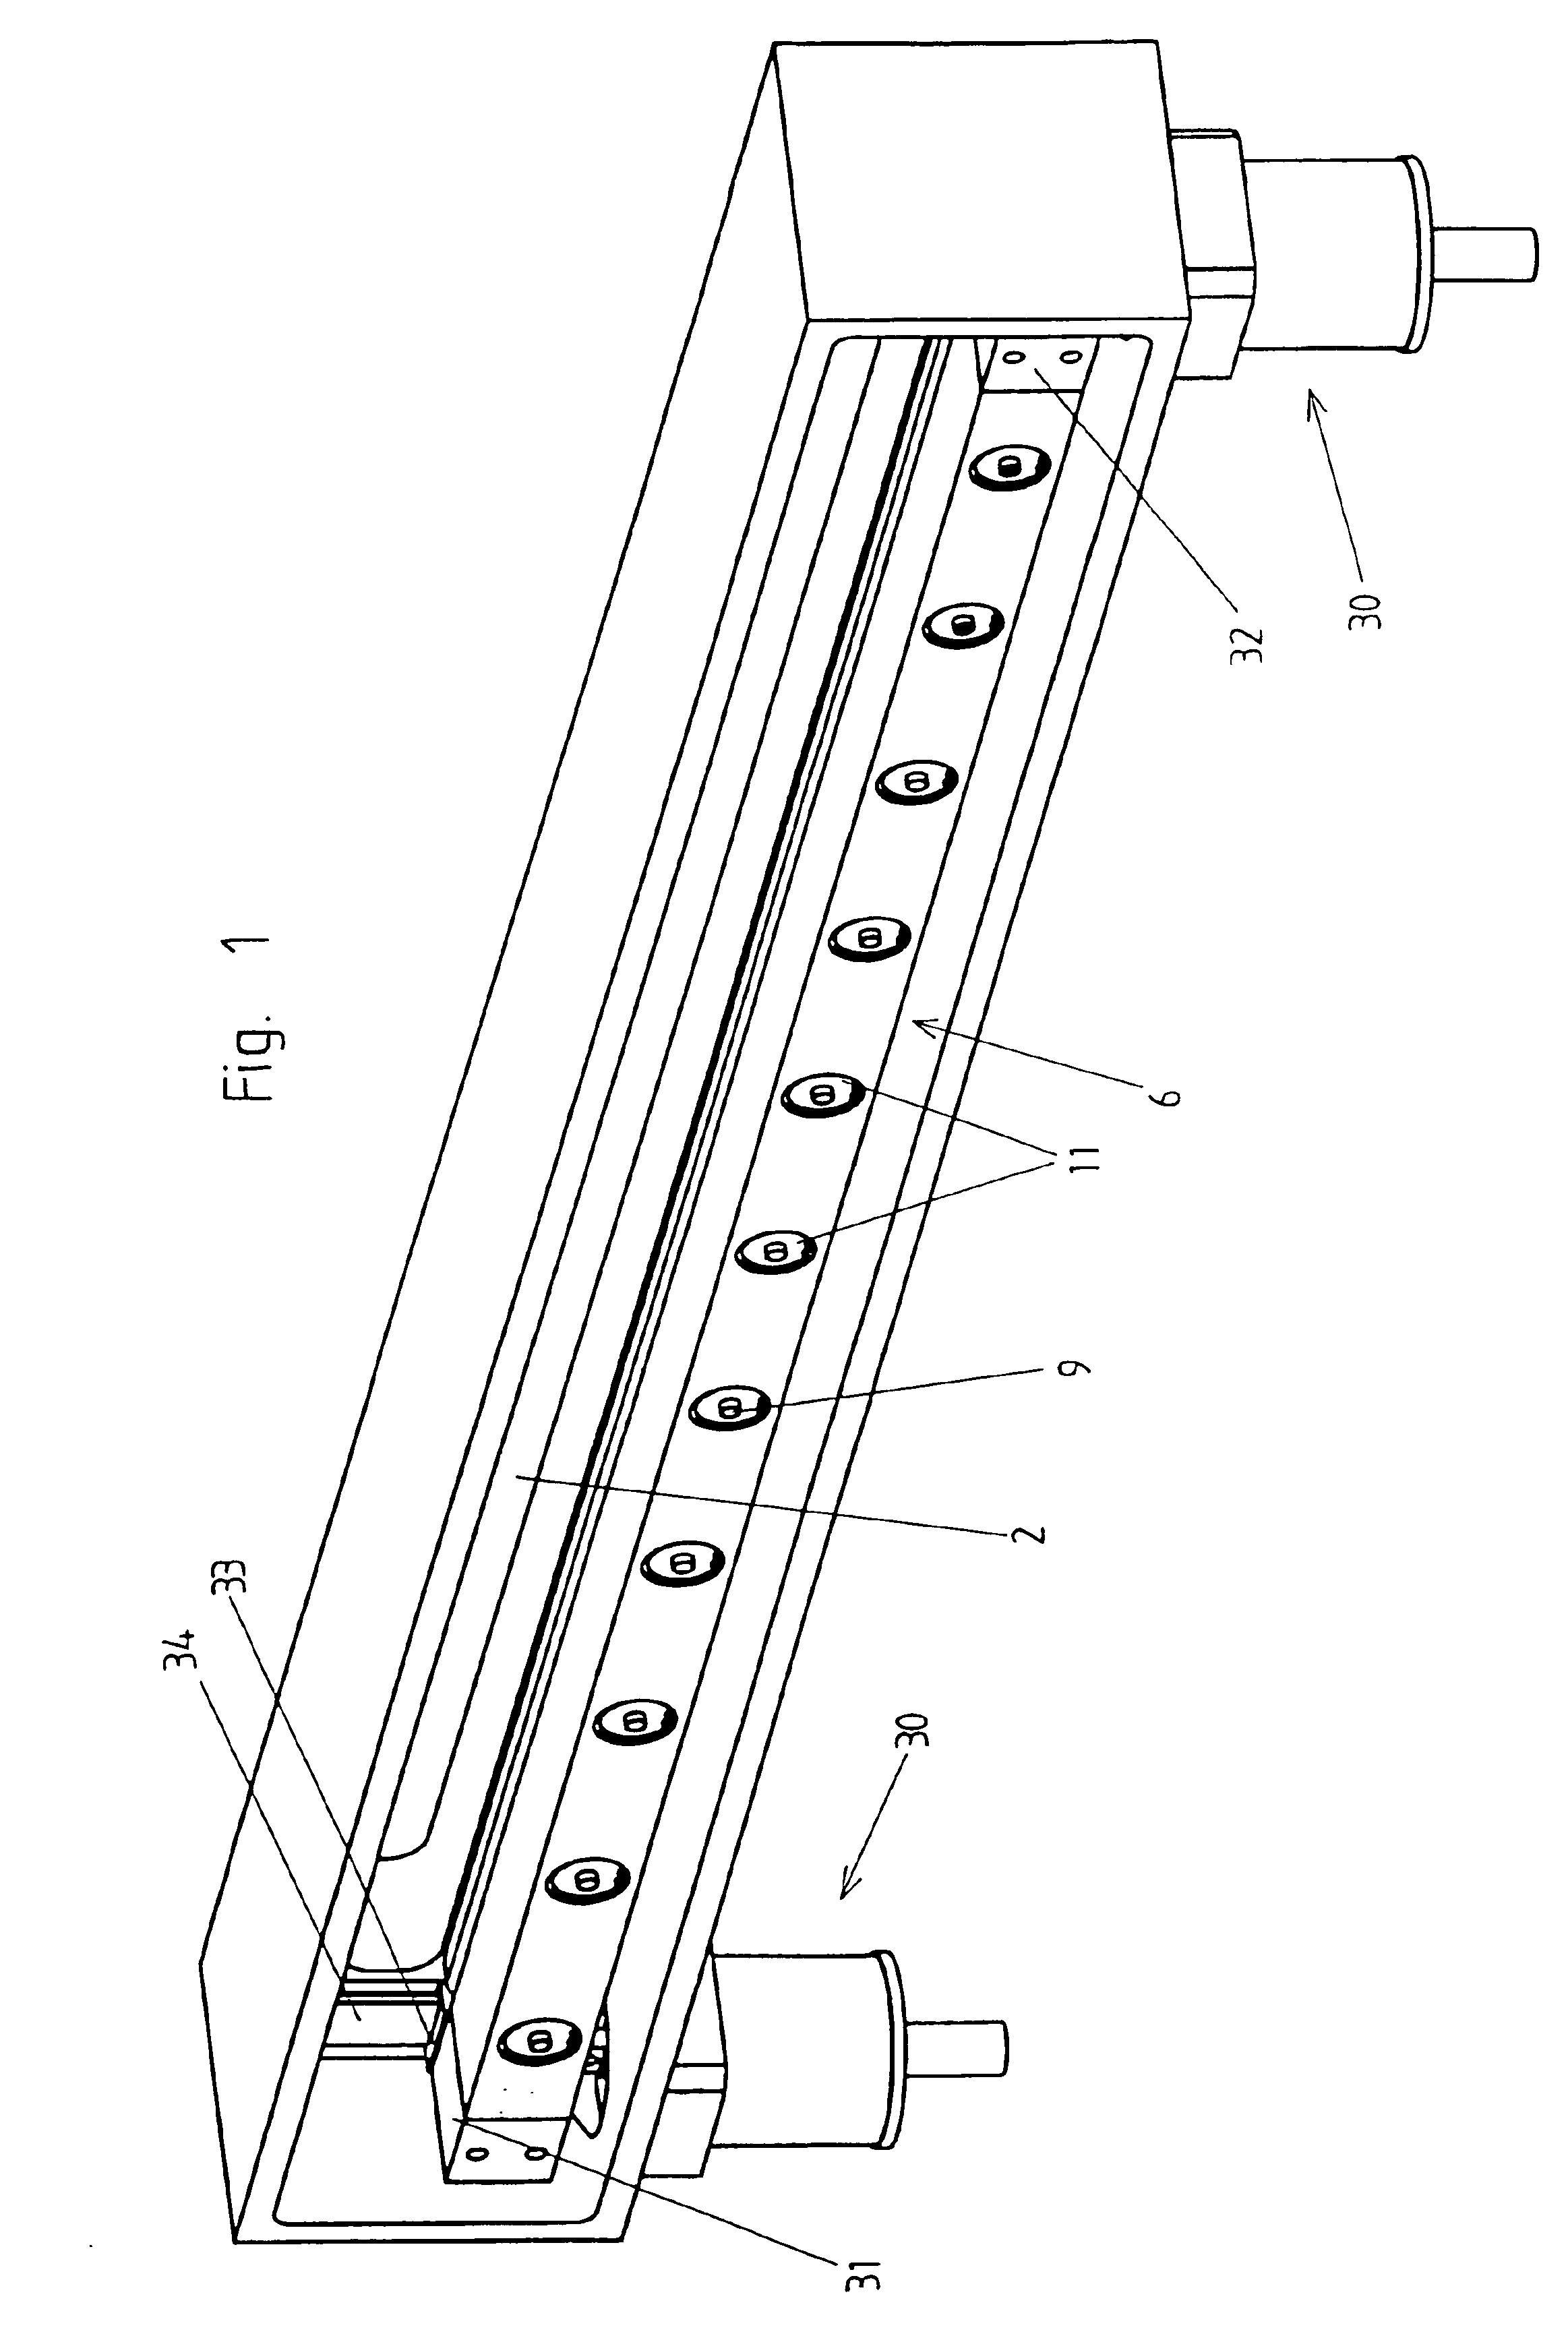 Closure device for vacuum closure of at least one opening in a wall